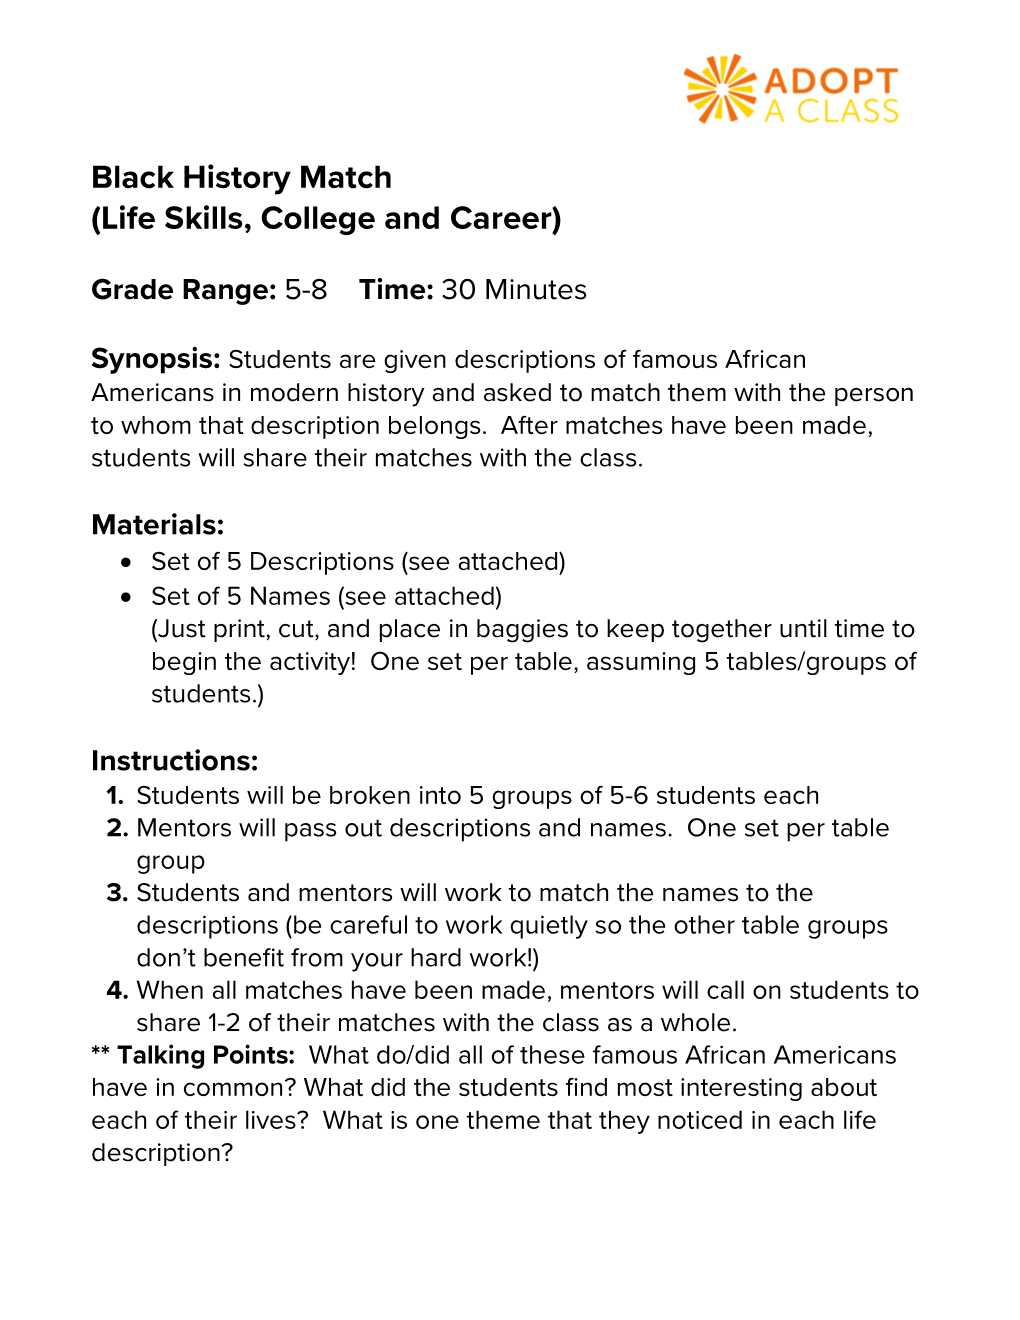 Black History Match (Life Skills, College and Career)